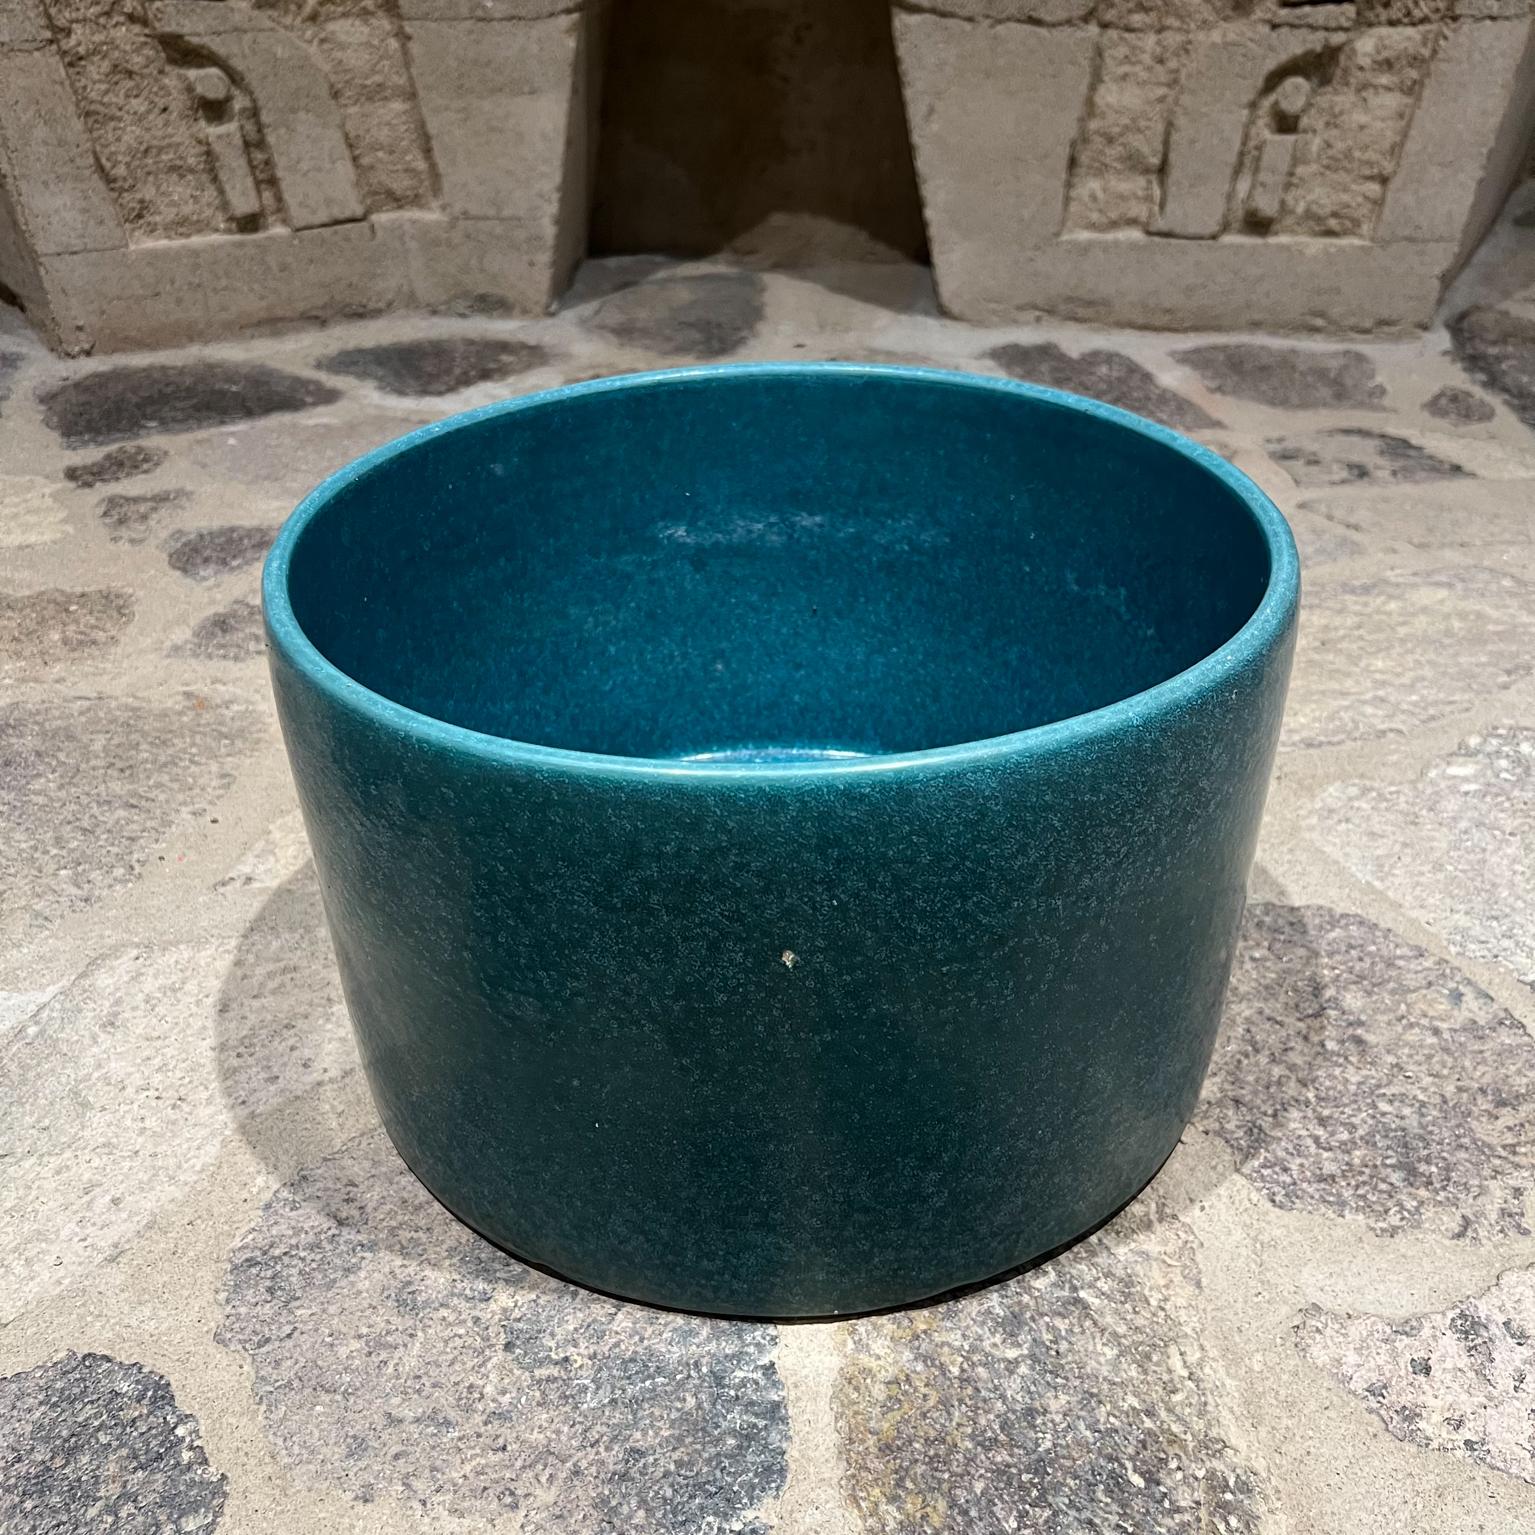 1960s Ceramics Aqua Green Turquoise Architectural pottery planter pot California
Color is divine.
Measures: 8.5 tall x 13.75 diameter
Planter Pot garden patio home
In the Style of Gainey Ceramics. Signed underneath with maker's label. 
Original